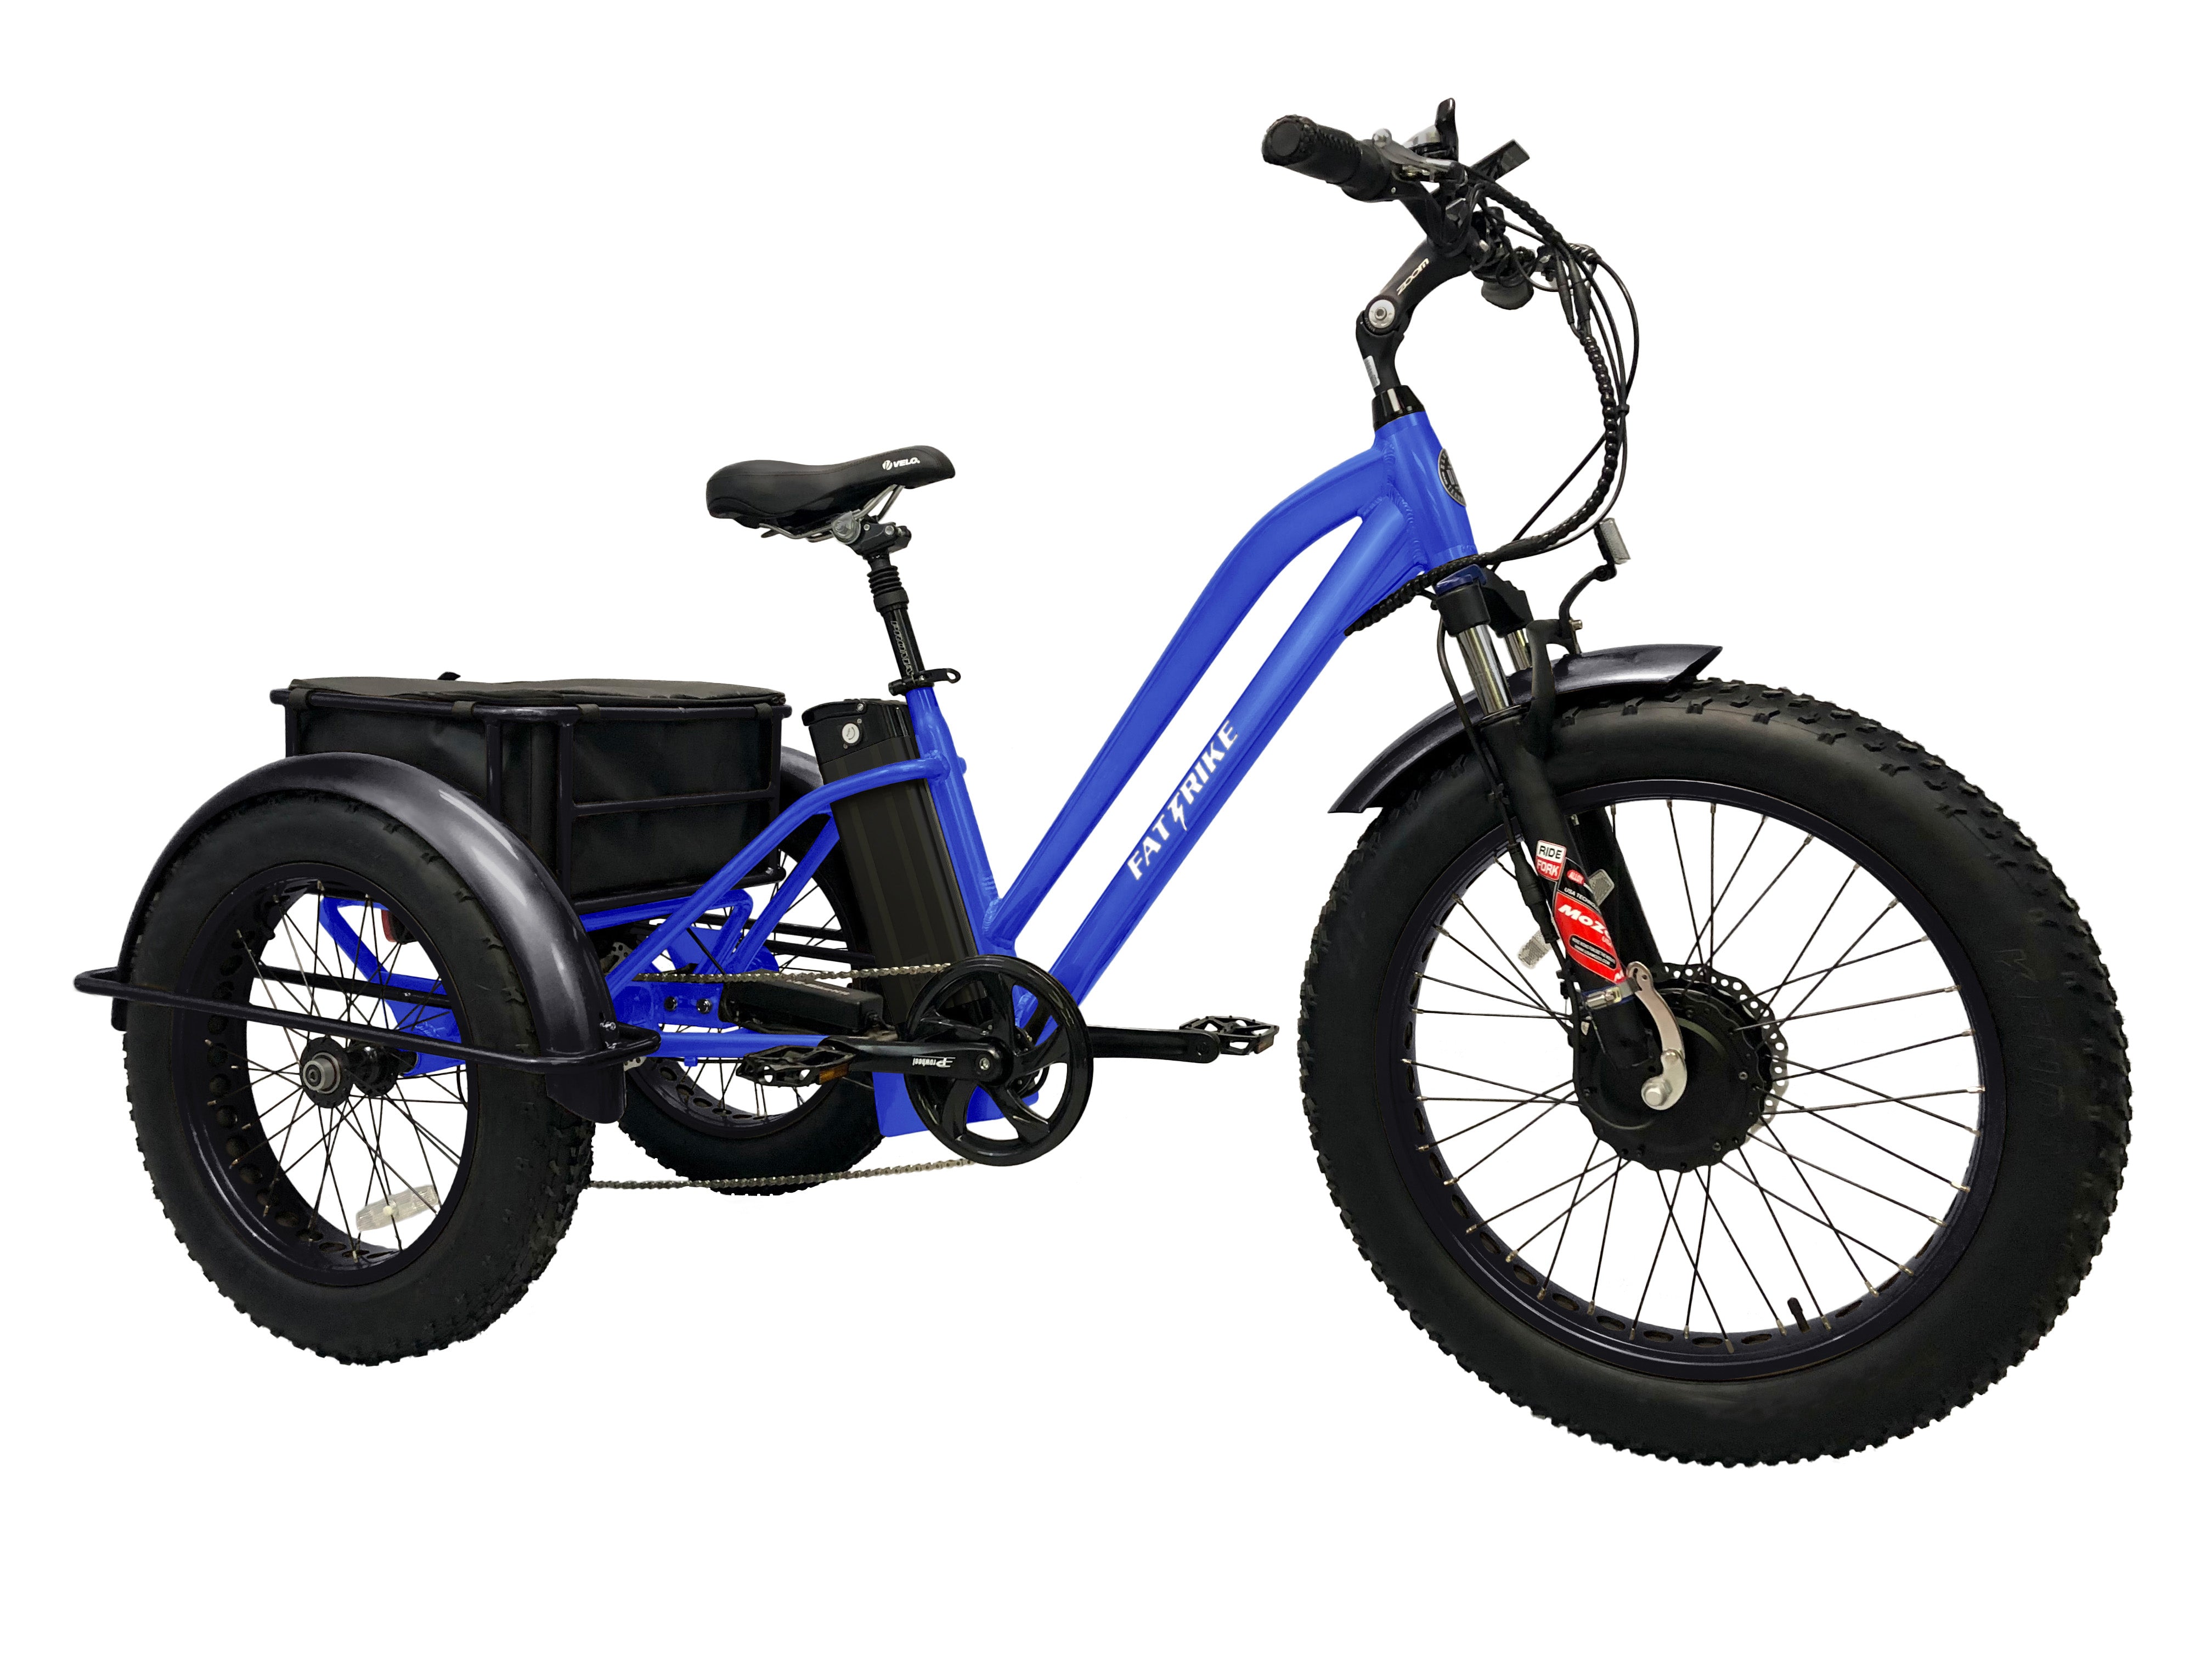 Special Needs Tricycle  Electric Bikes for Disabled Adults